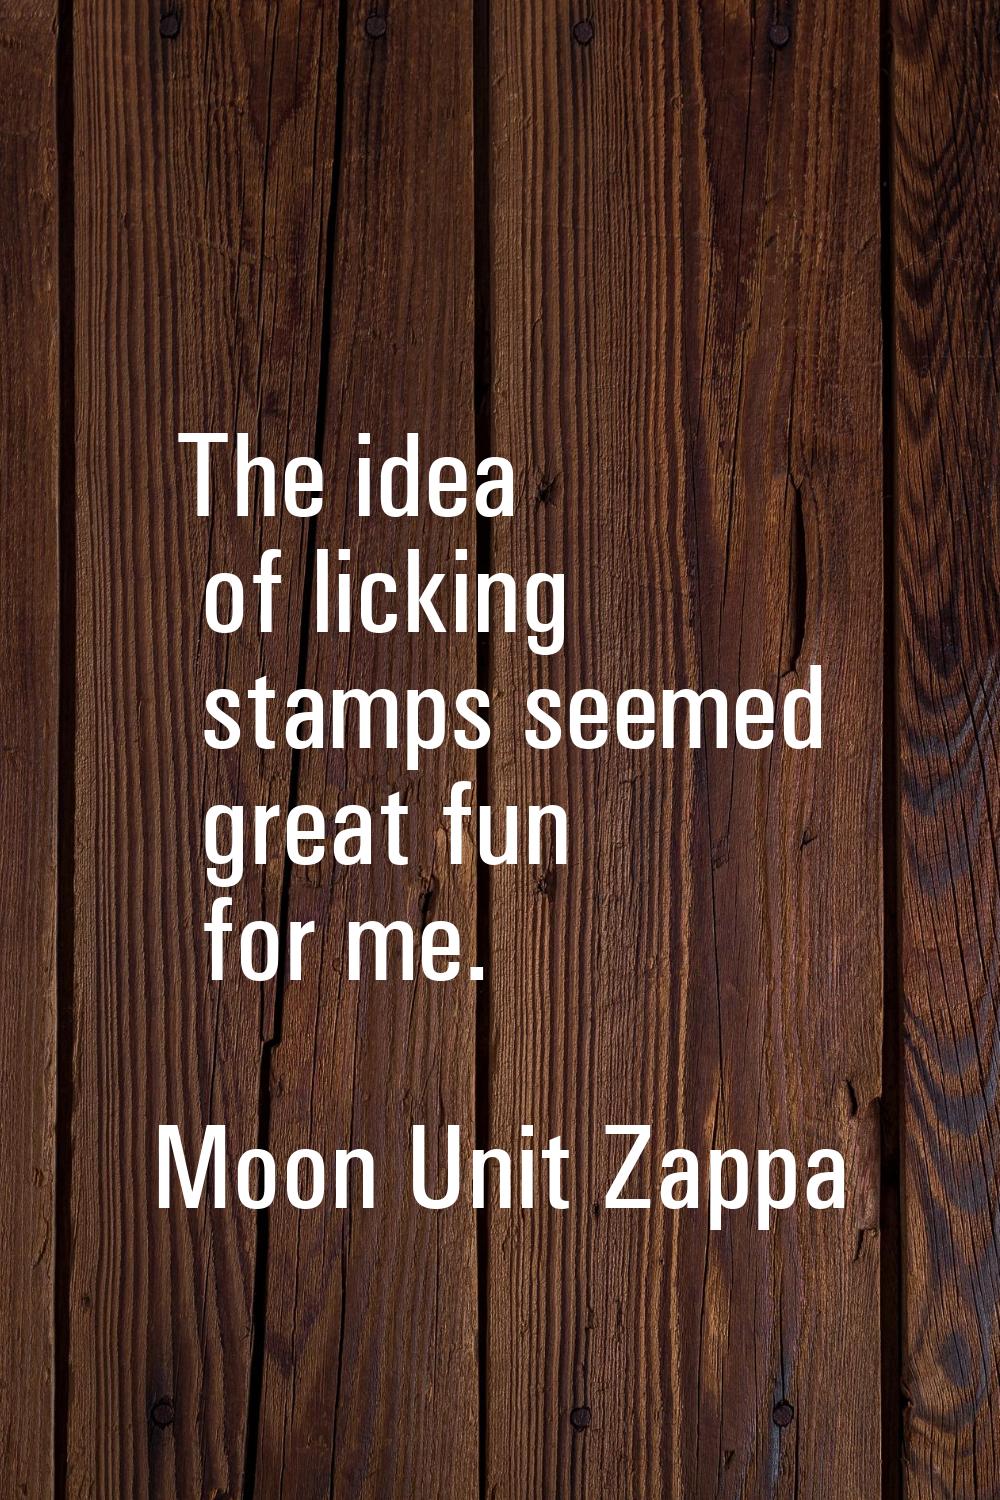 The idea of licking stamps seemed great fun for me.